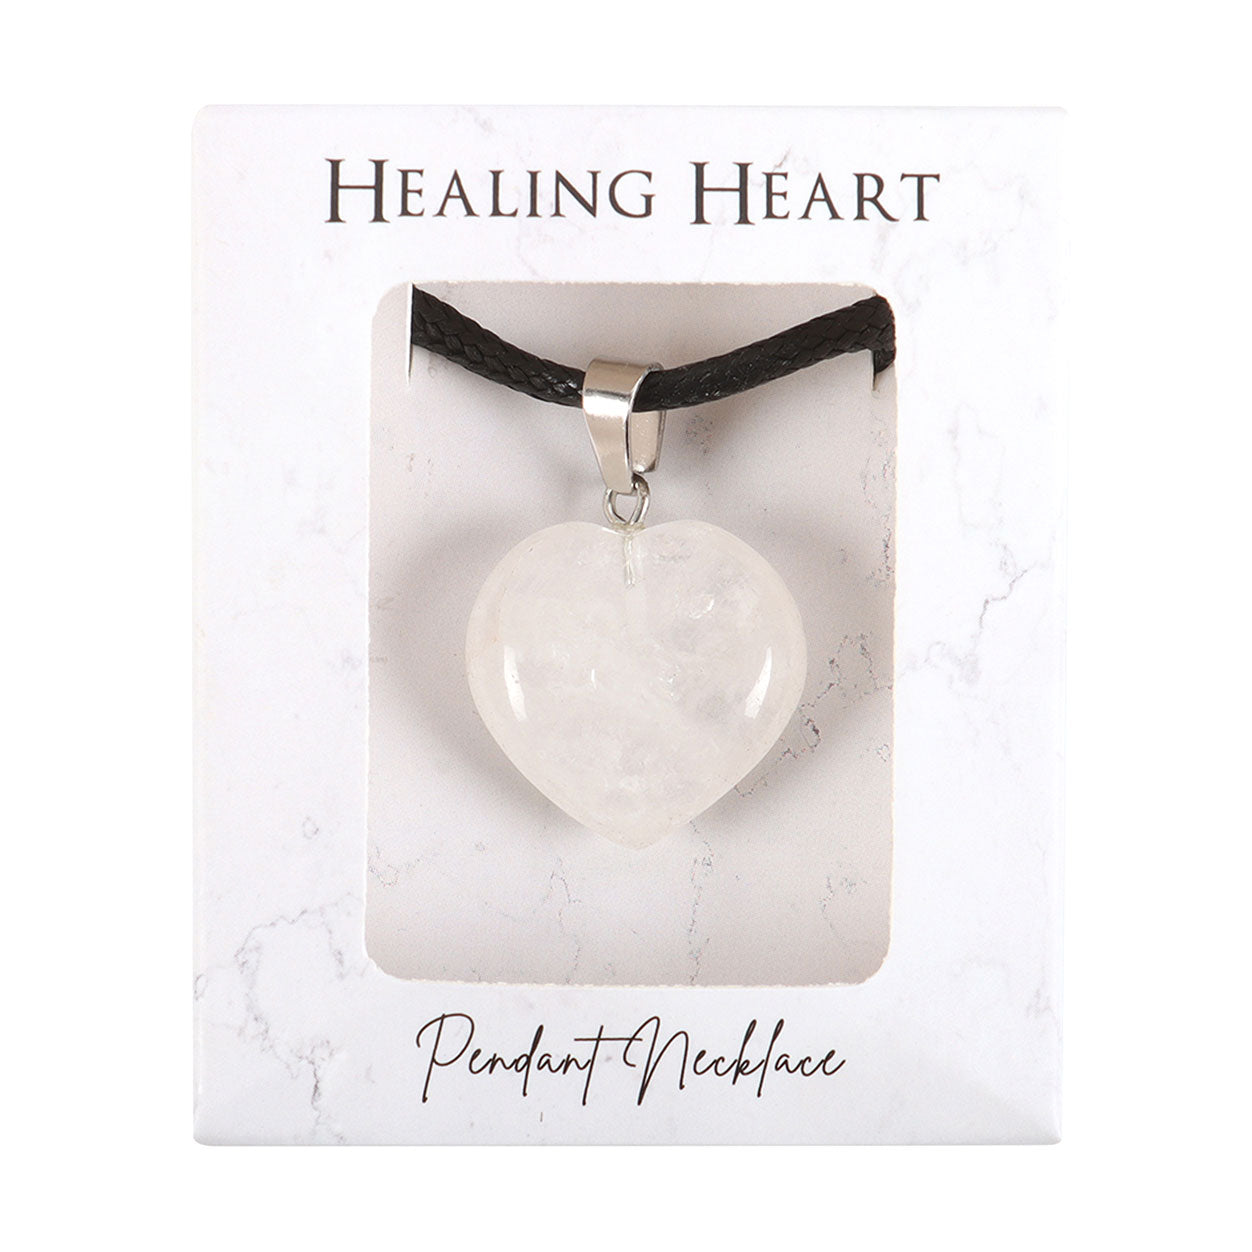 Crystal healing heart pendant necklaces